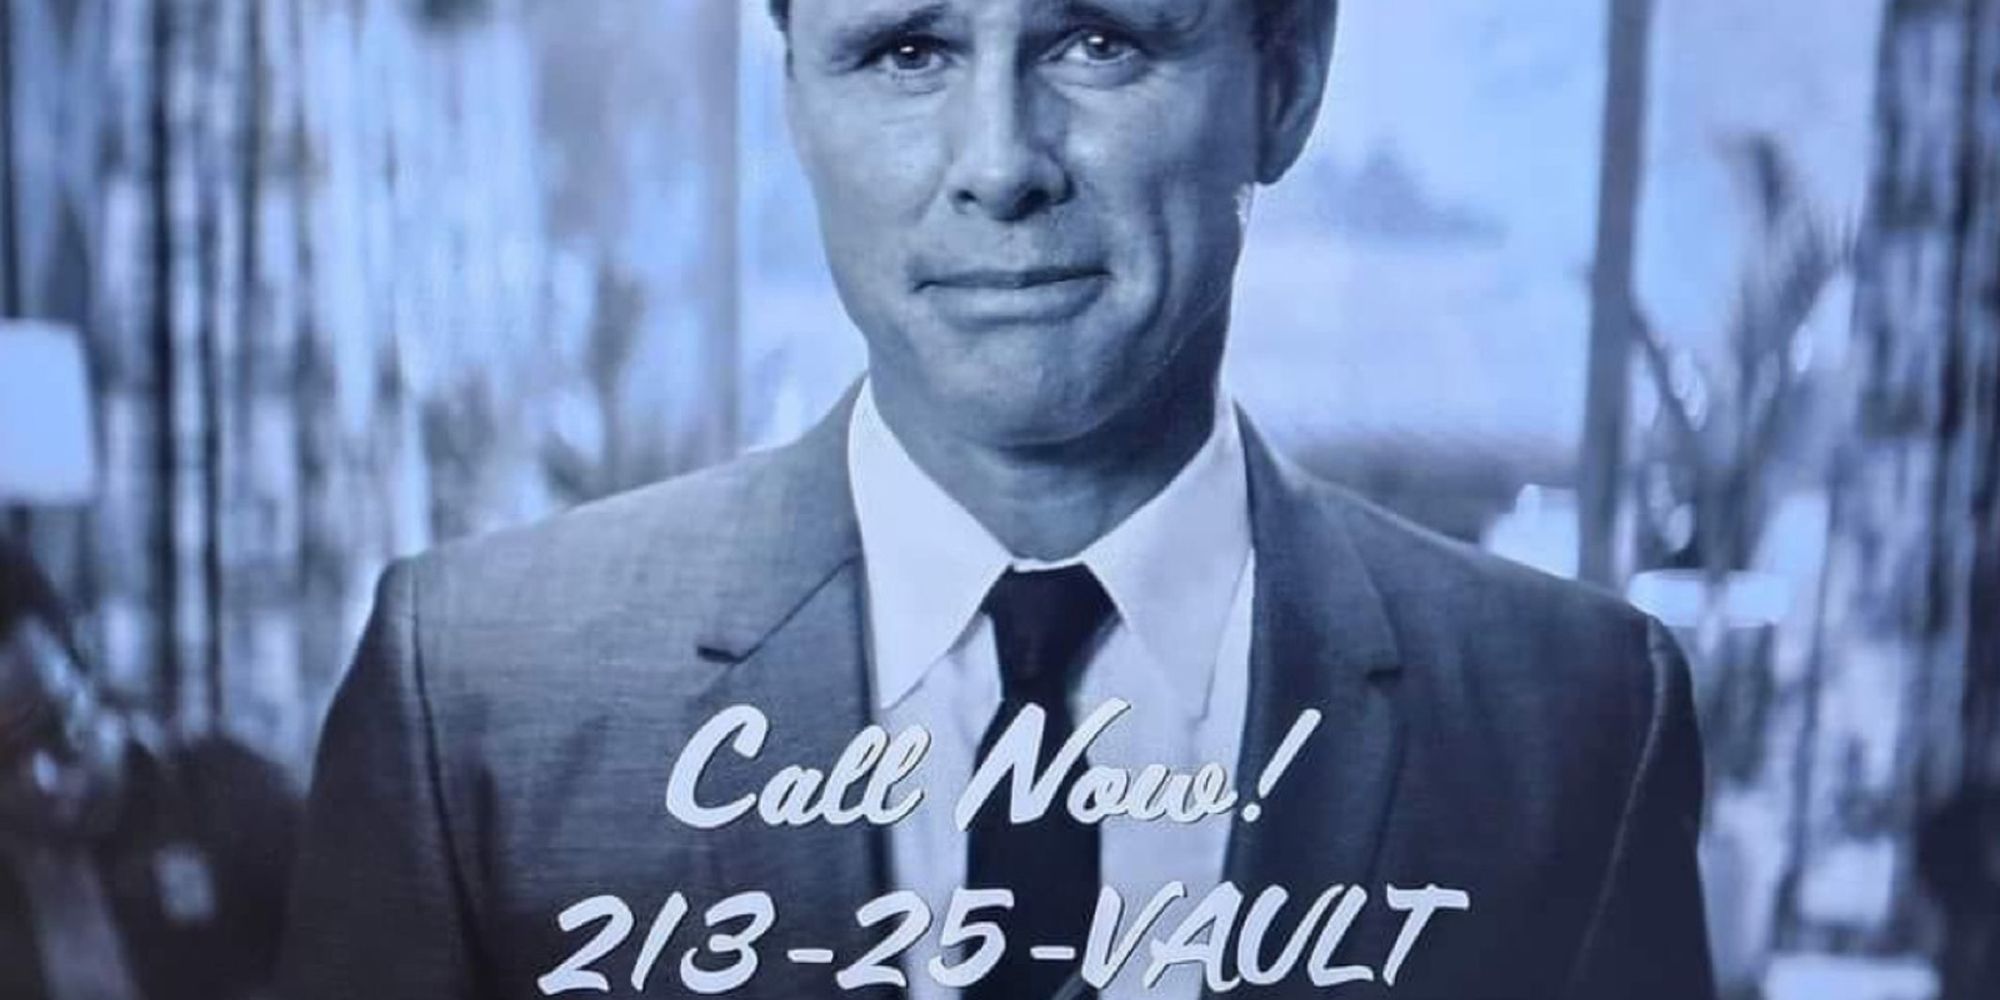 Fallout TV Series' Vault Tec Phone Number Teases News In "33 Weeks"